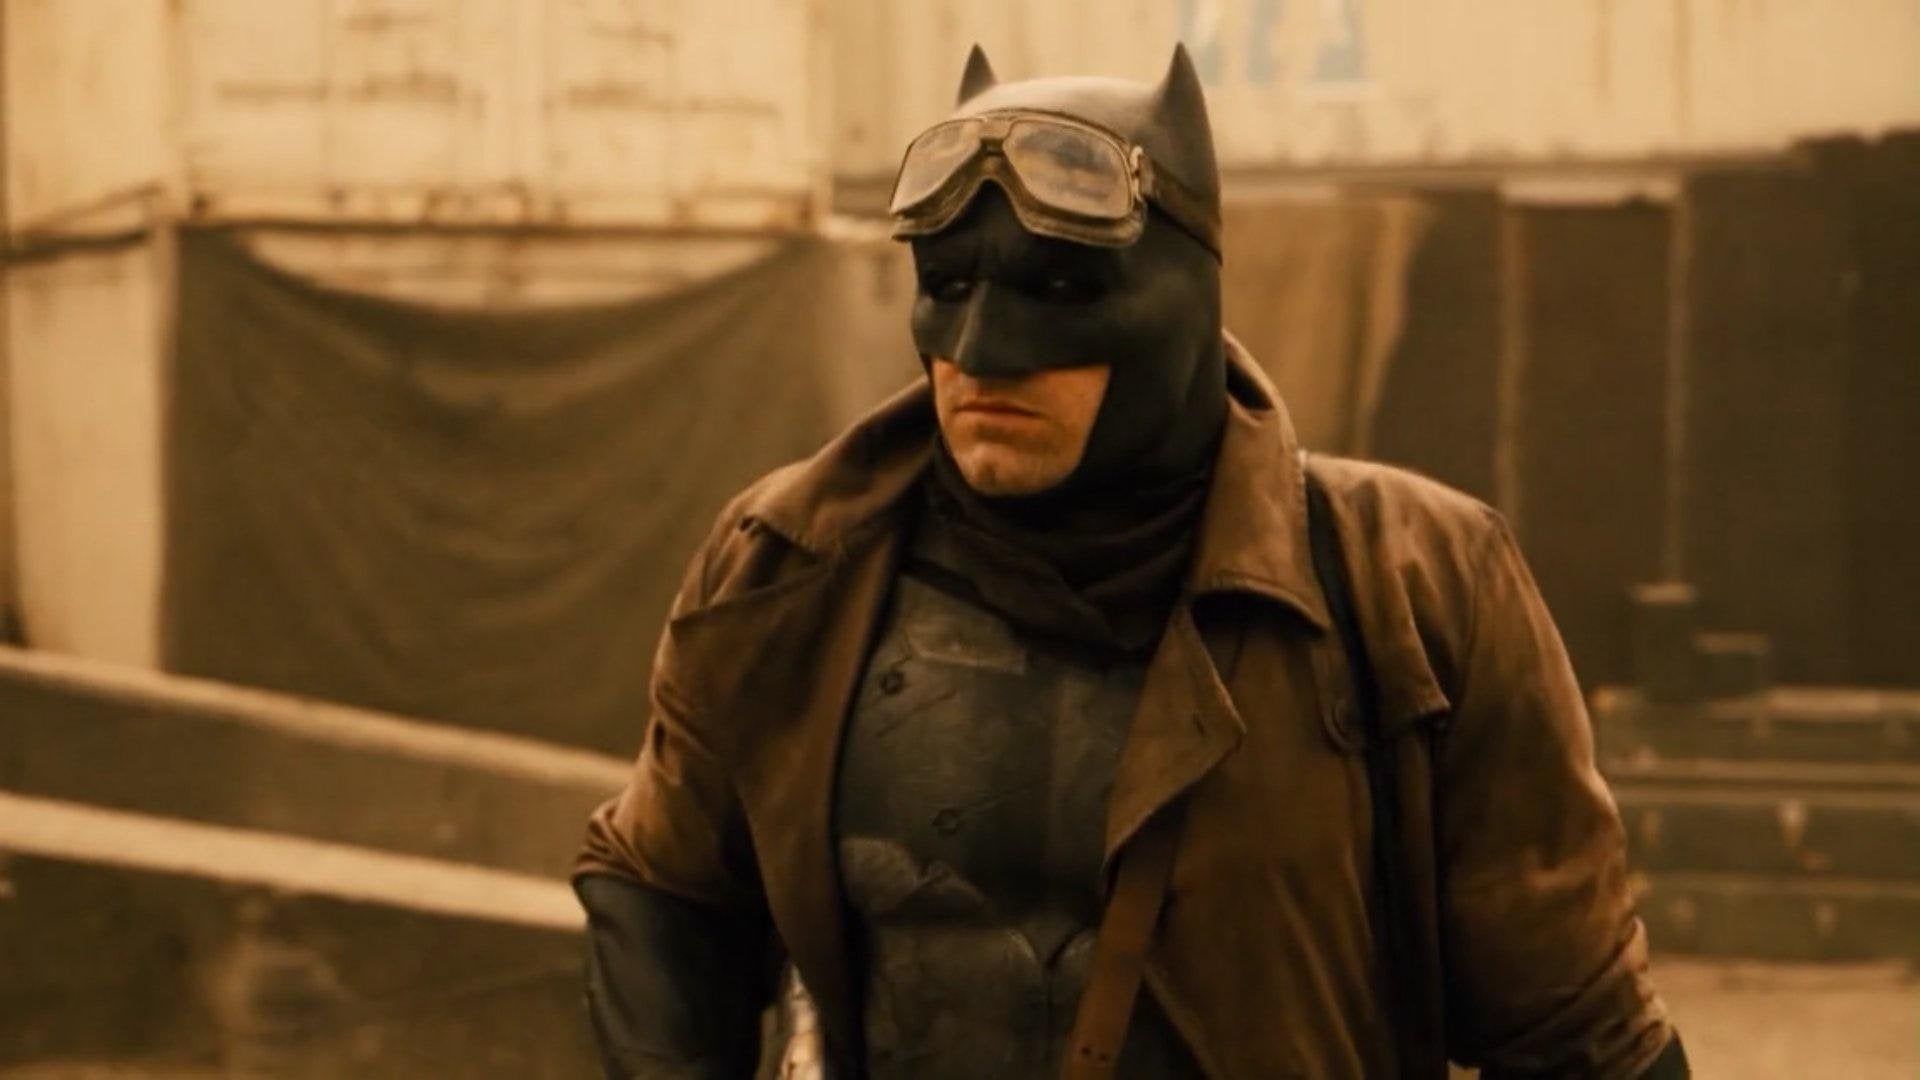 Other: Is there HQ version of this pic of Knightmare Batman?, DC_Cinematic